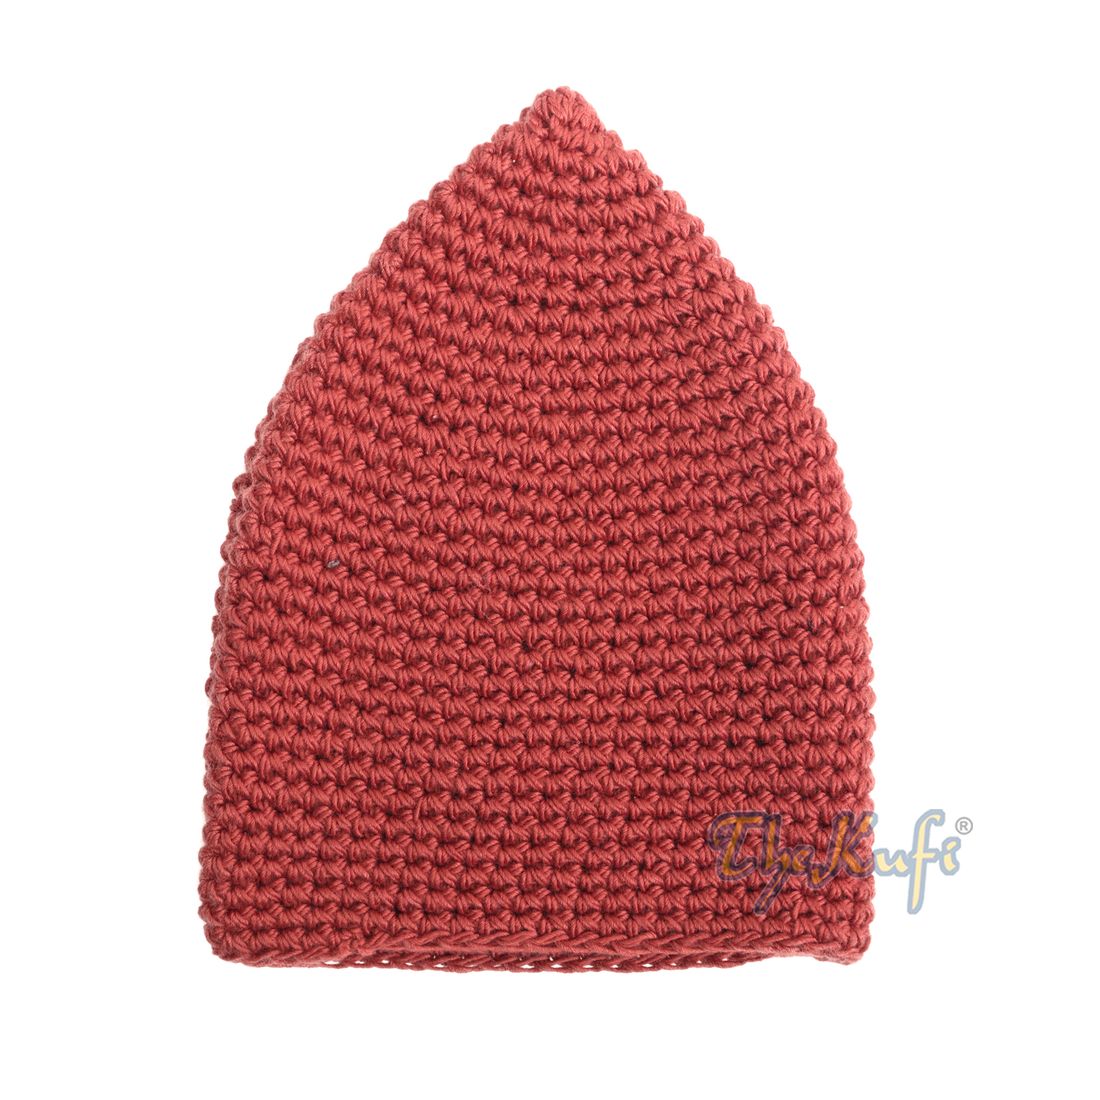 Plain Dark Red Hand-Crocheted 100% Cotton Kufi Hat Unique Design and Comfortable Fit